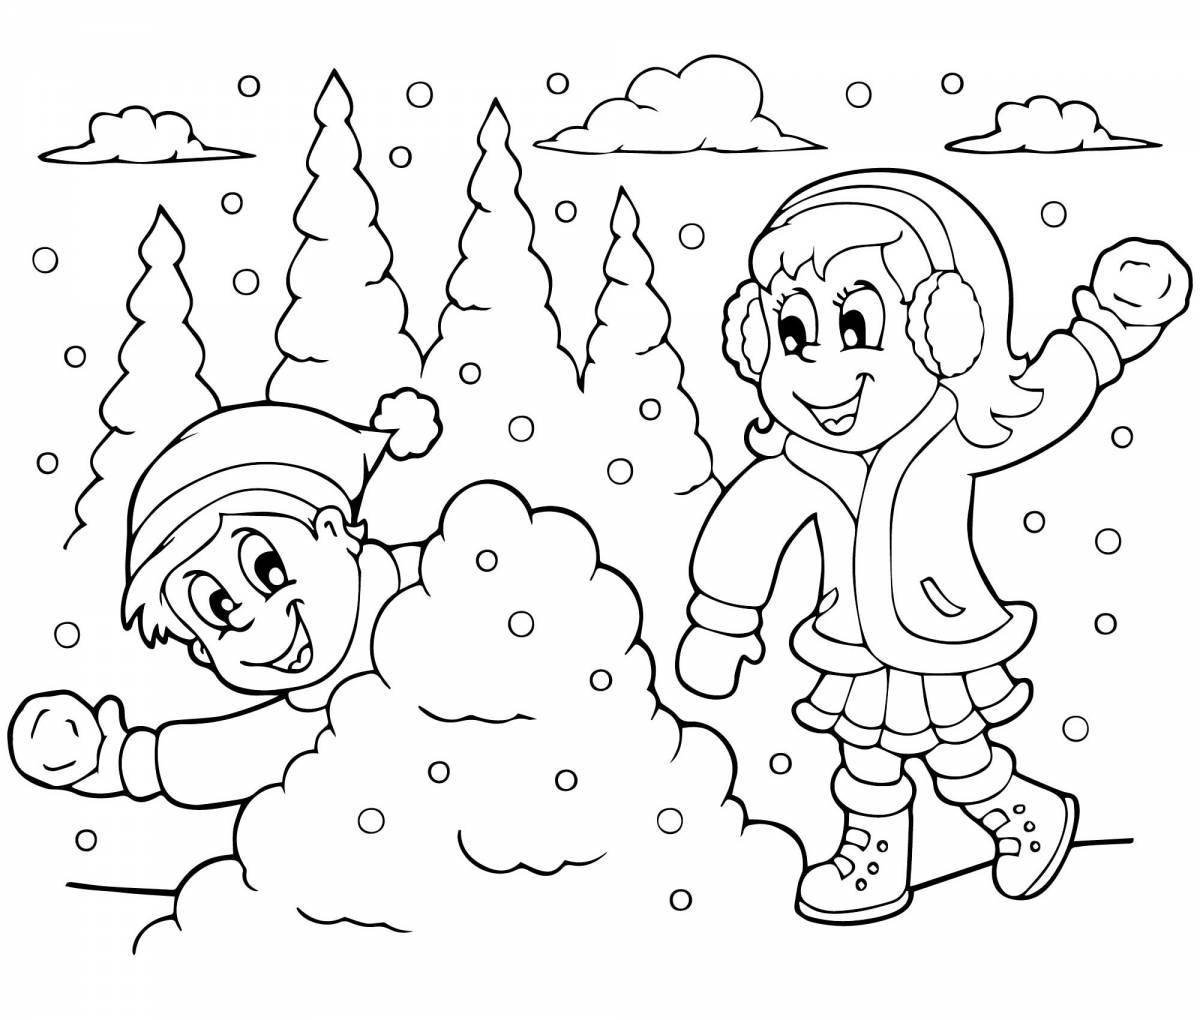 Glittering snowfall coloring book for toddlers